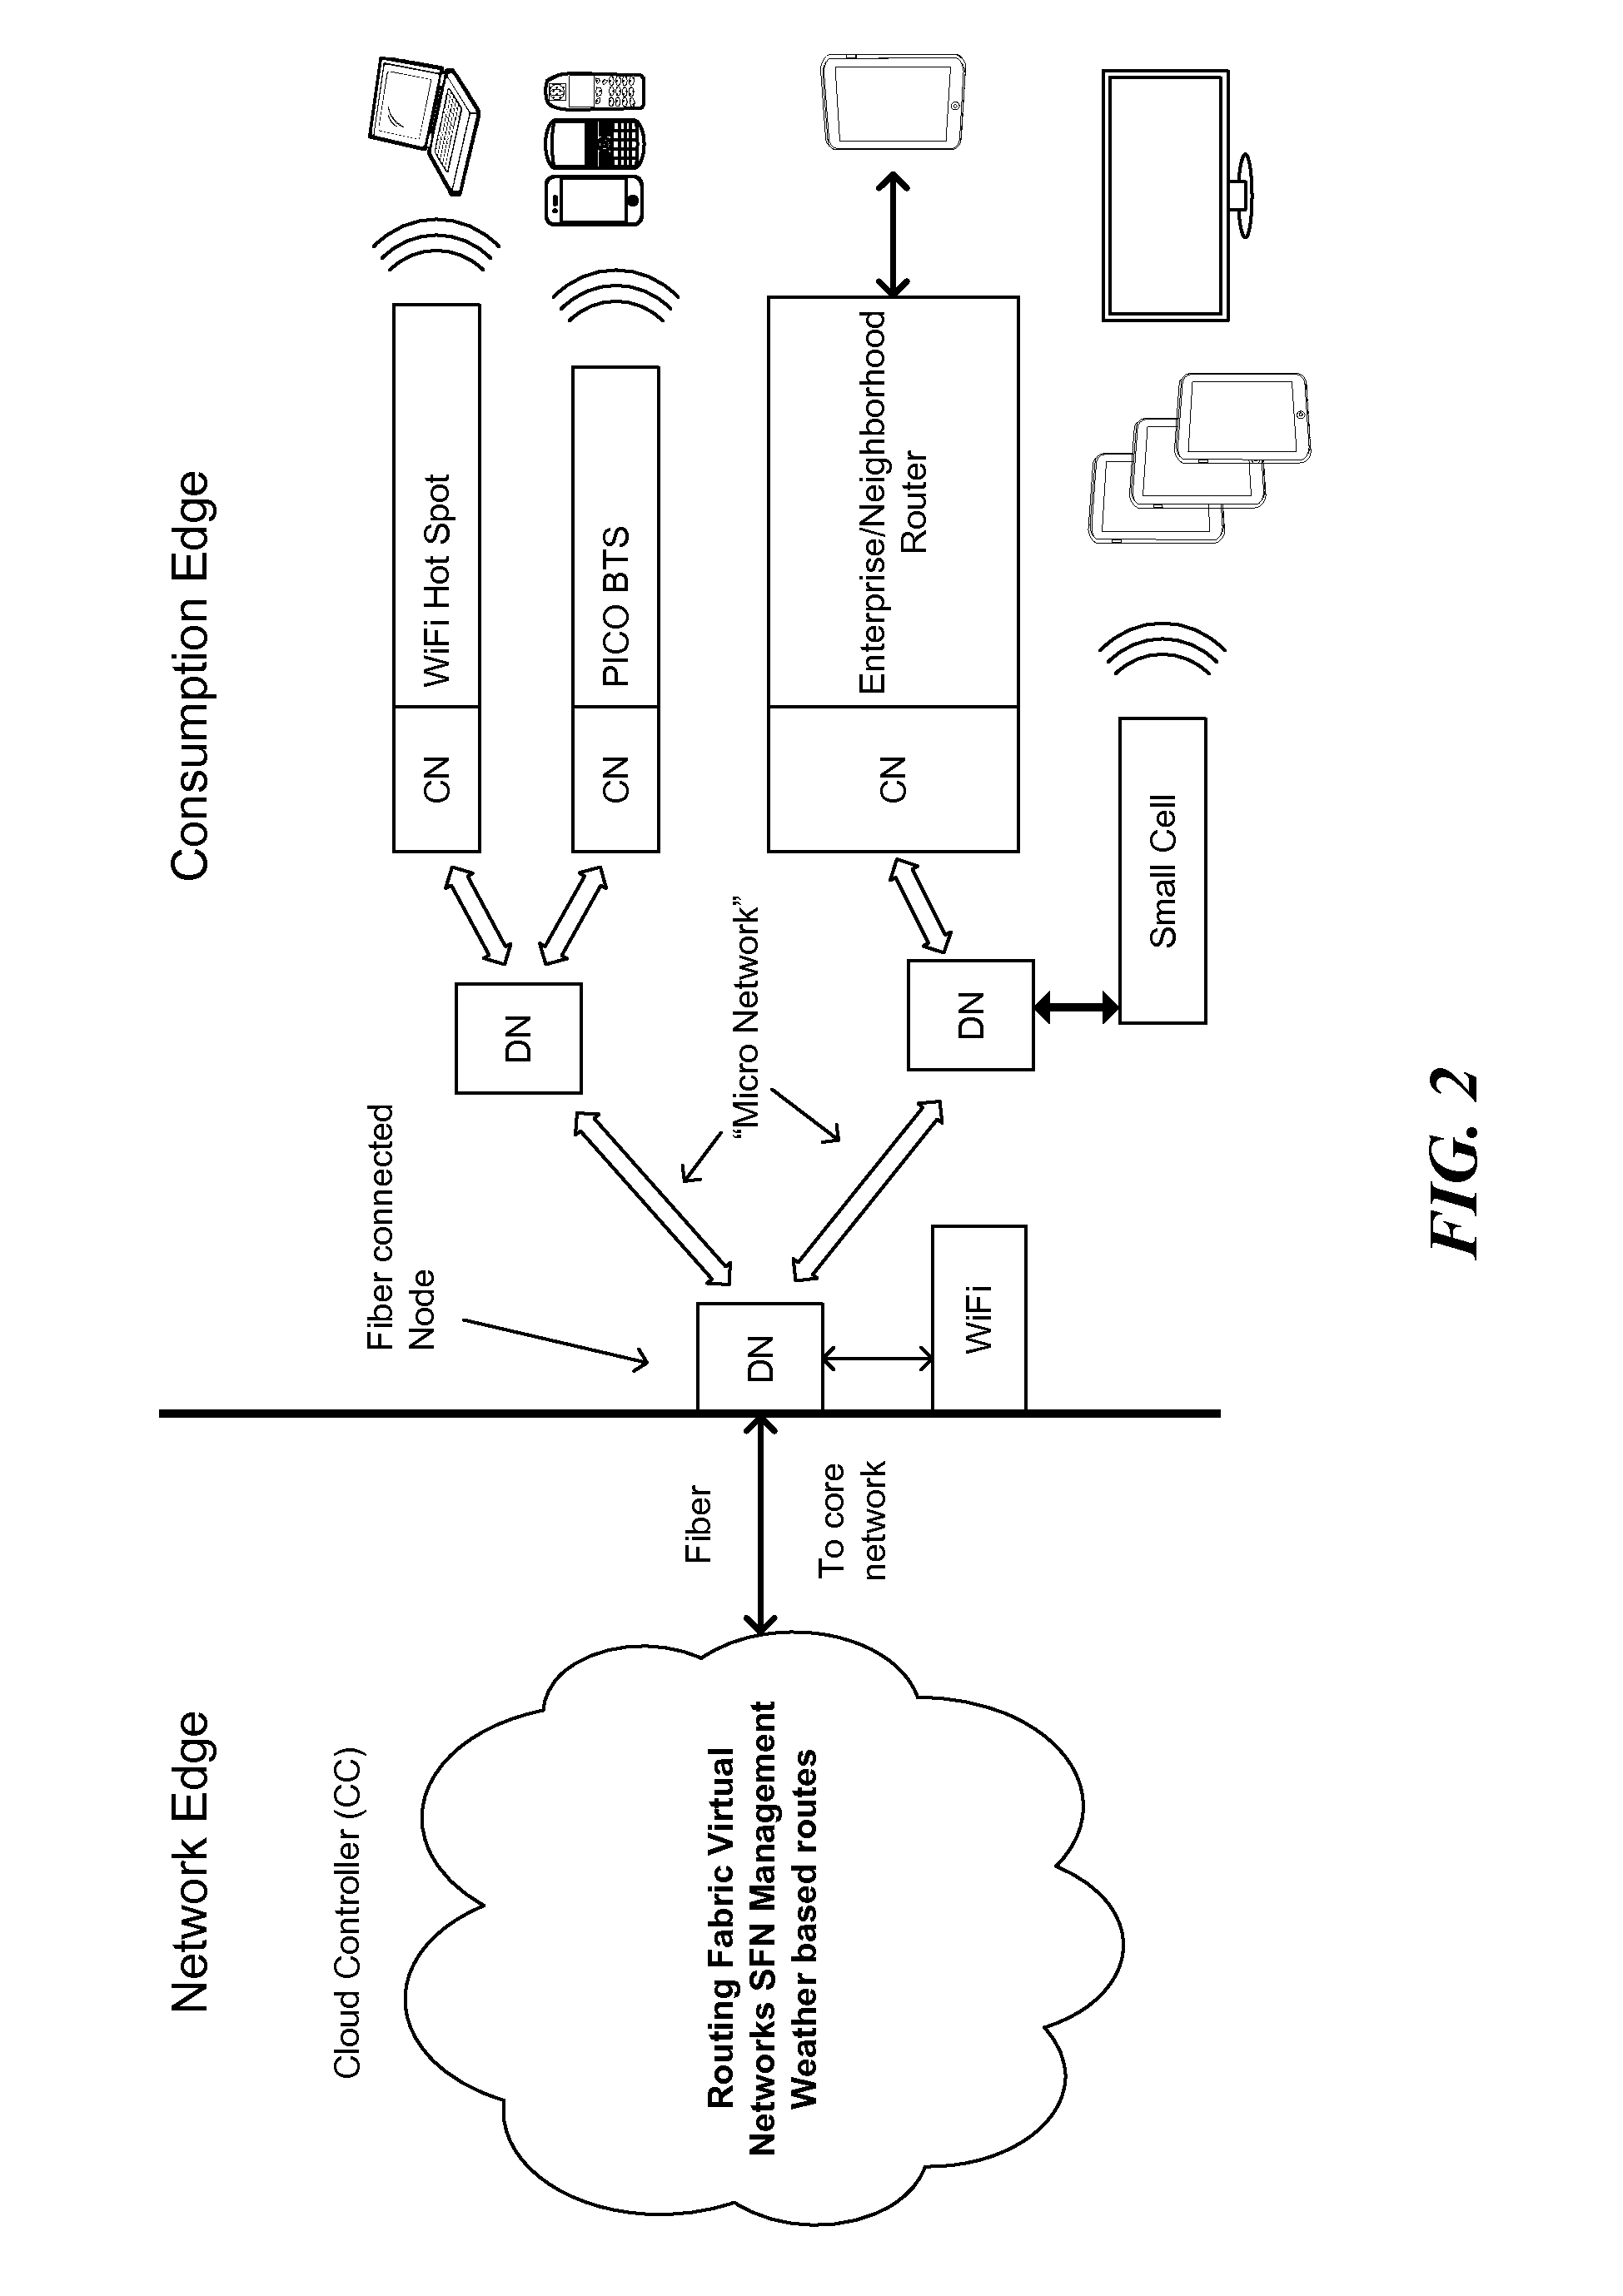 Distribution node and client node for next generation data network